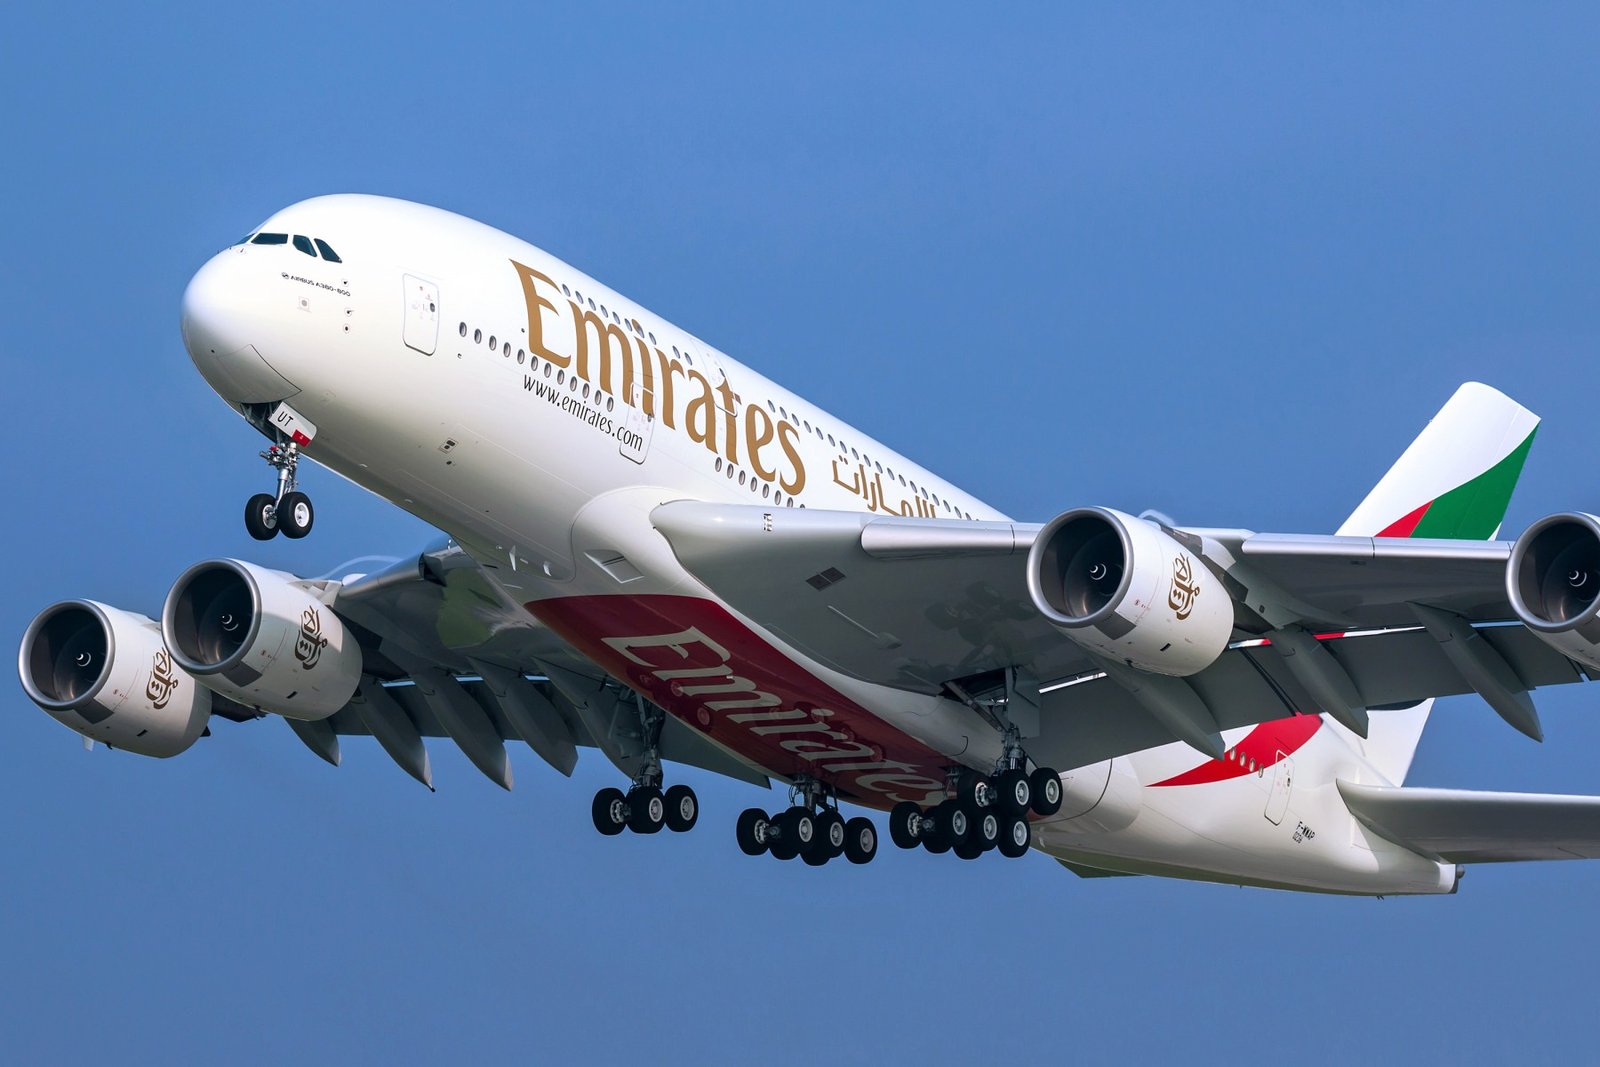 Emirates airline launches new ‘hospitality-based’ operational strategy